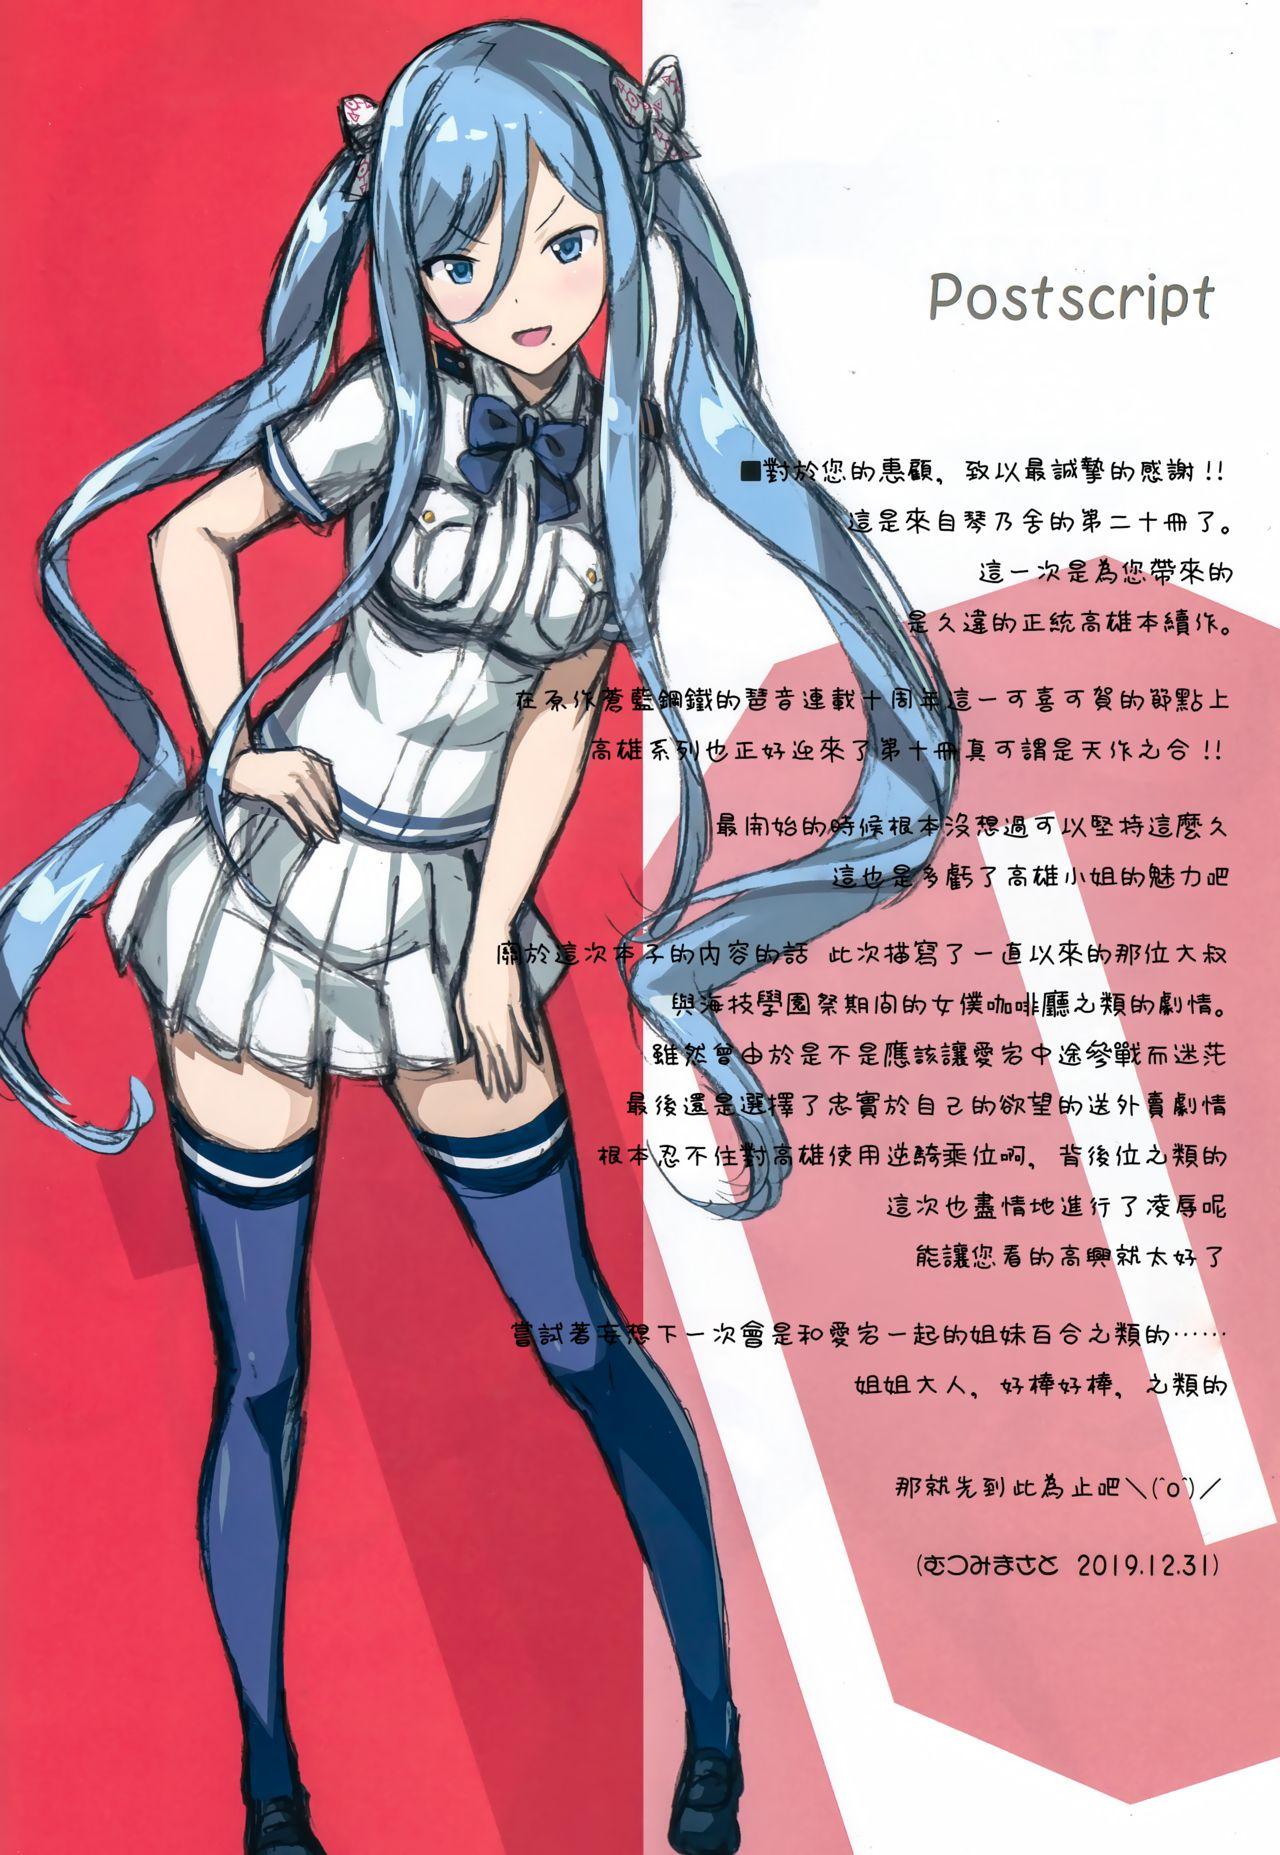 White TAKAO OF BLUE STEEL 10 - Arpeggio of blue steel Female - Page 4